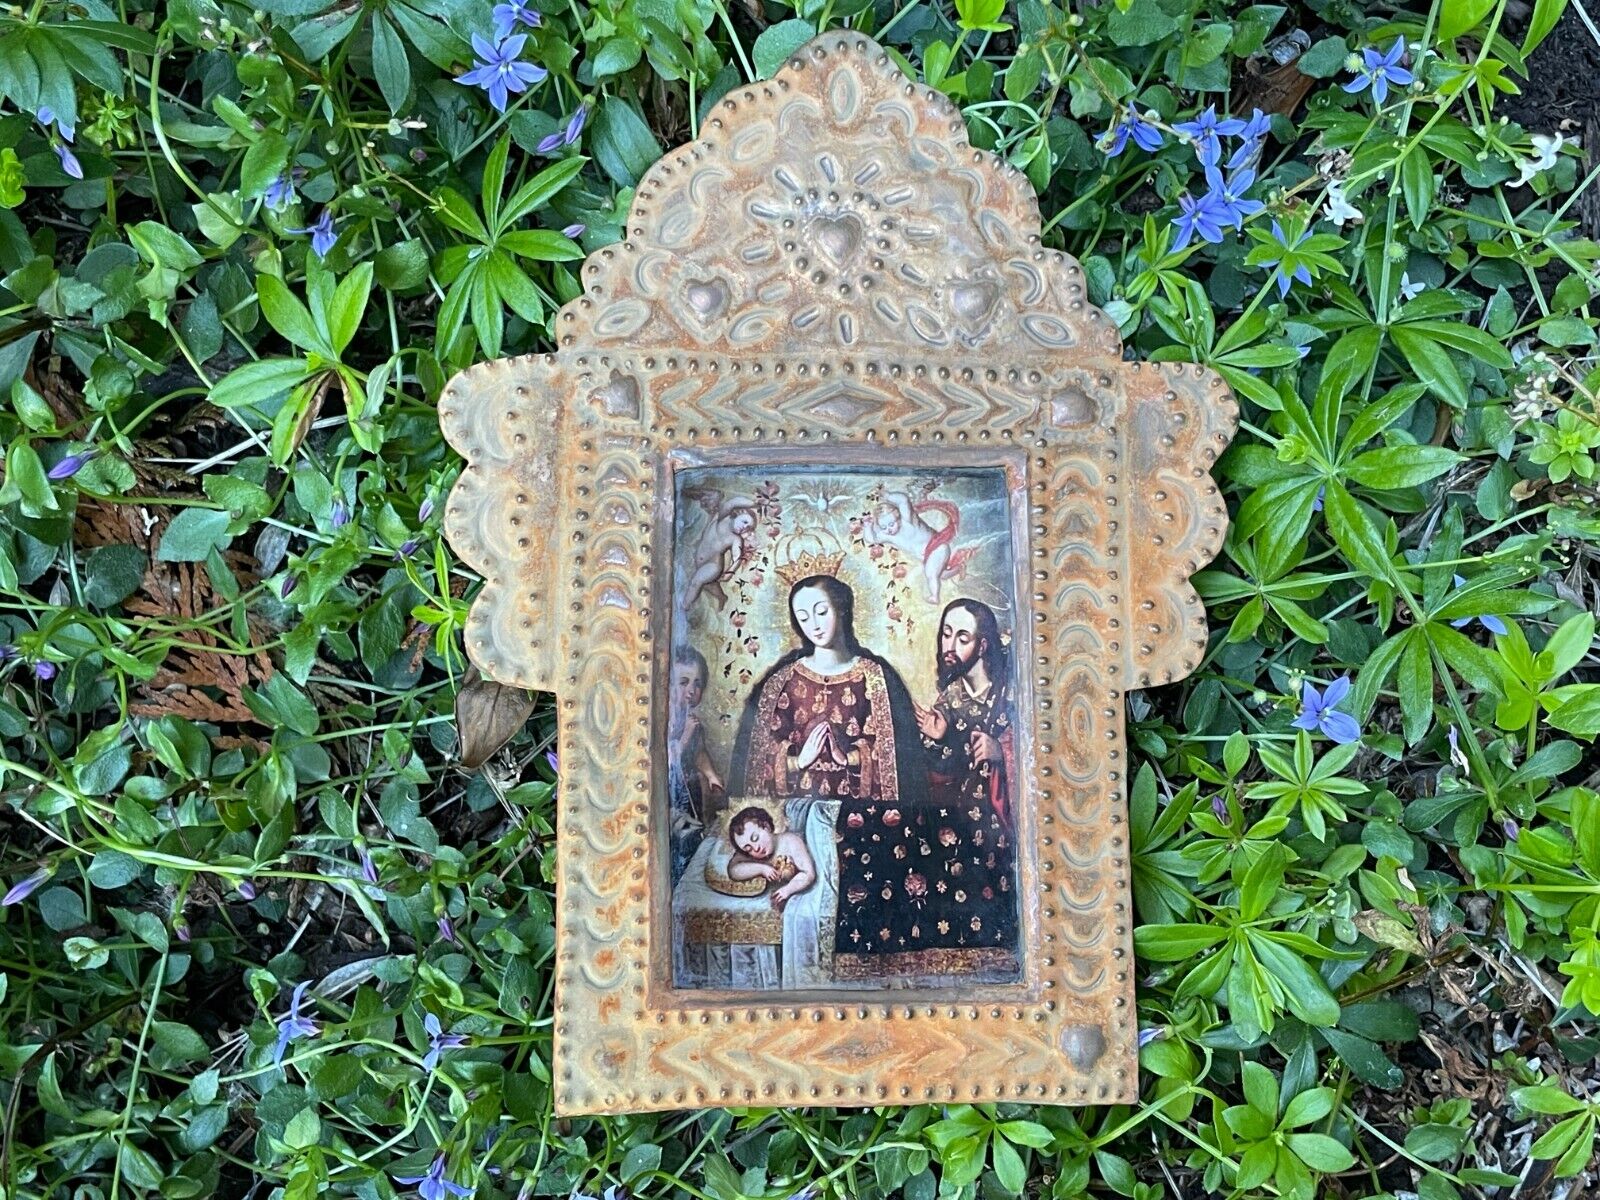 Antiqued Tin Nicho with Nativity Scene, Mexican Nicho, Christmas in Mexico